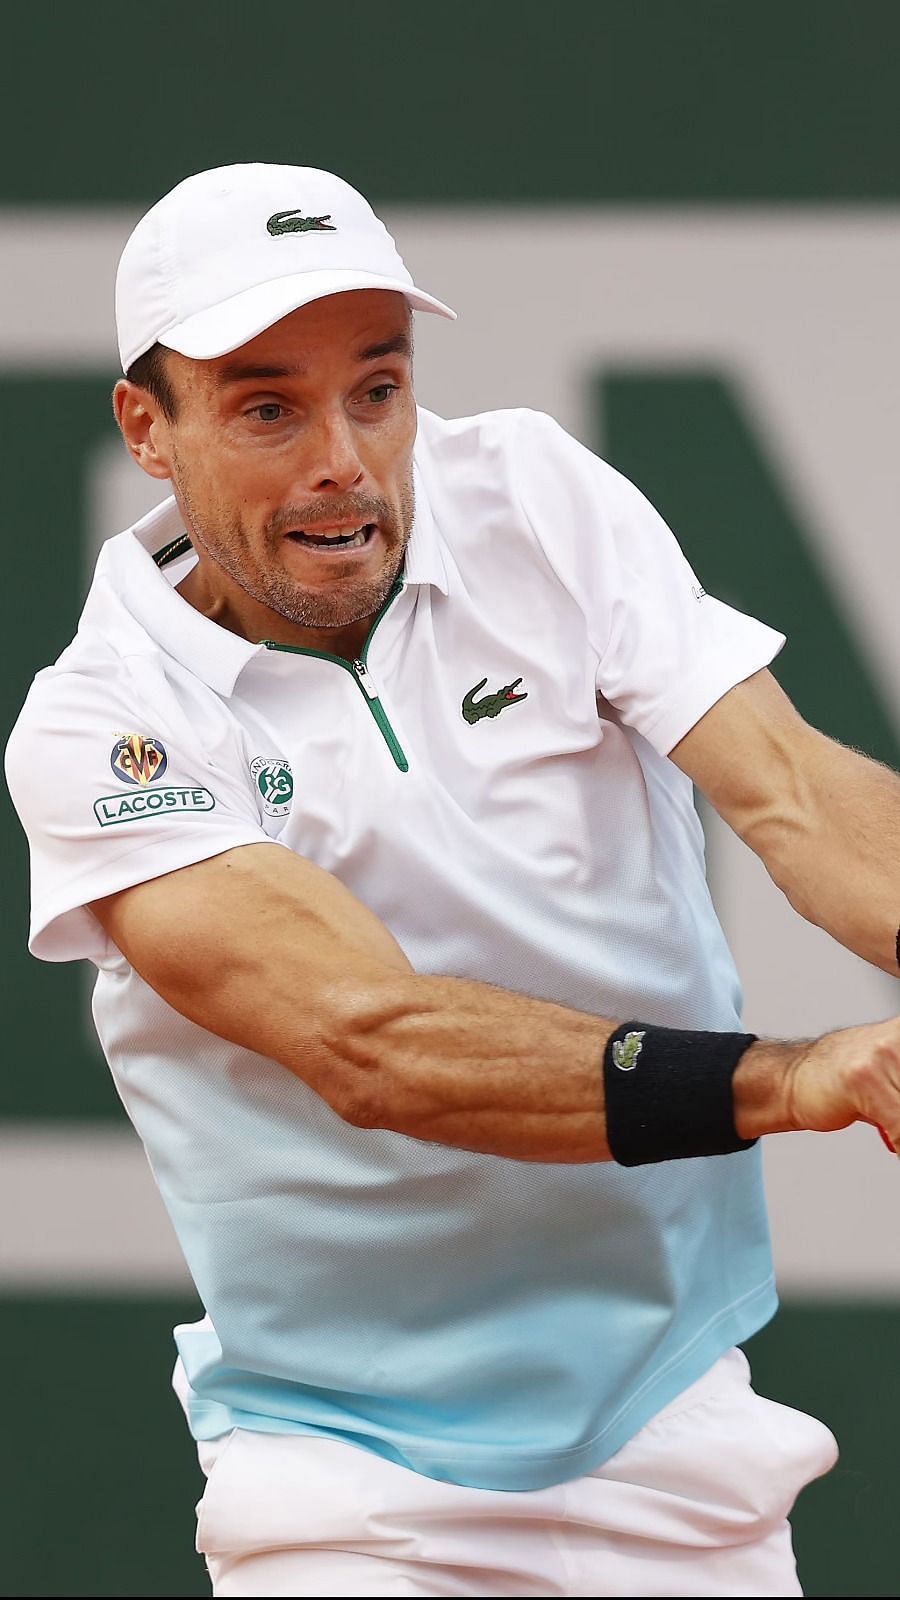 Roberto Bautista Agut Results : Atp Swiss Open Day 4 Predictions